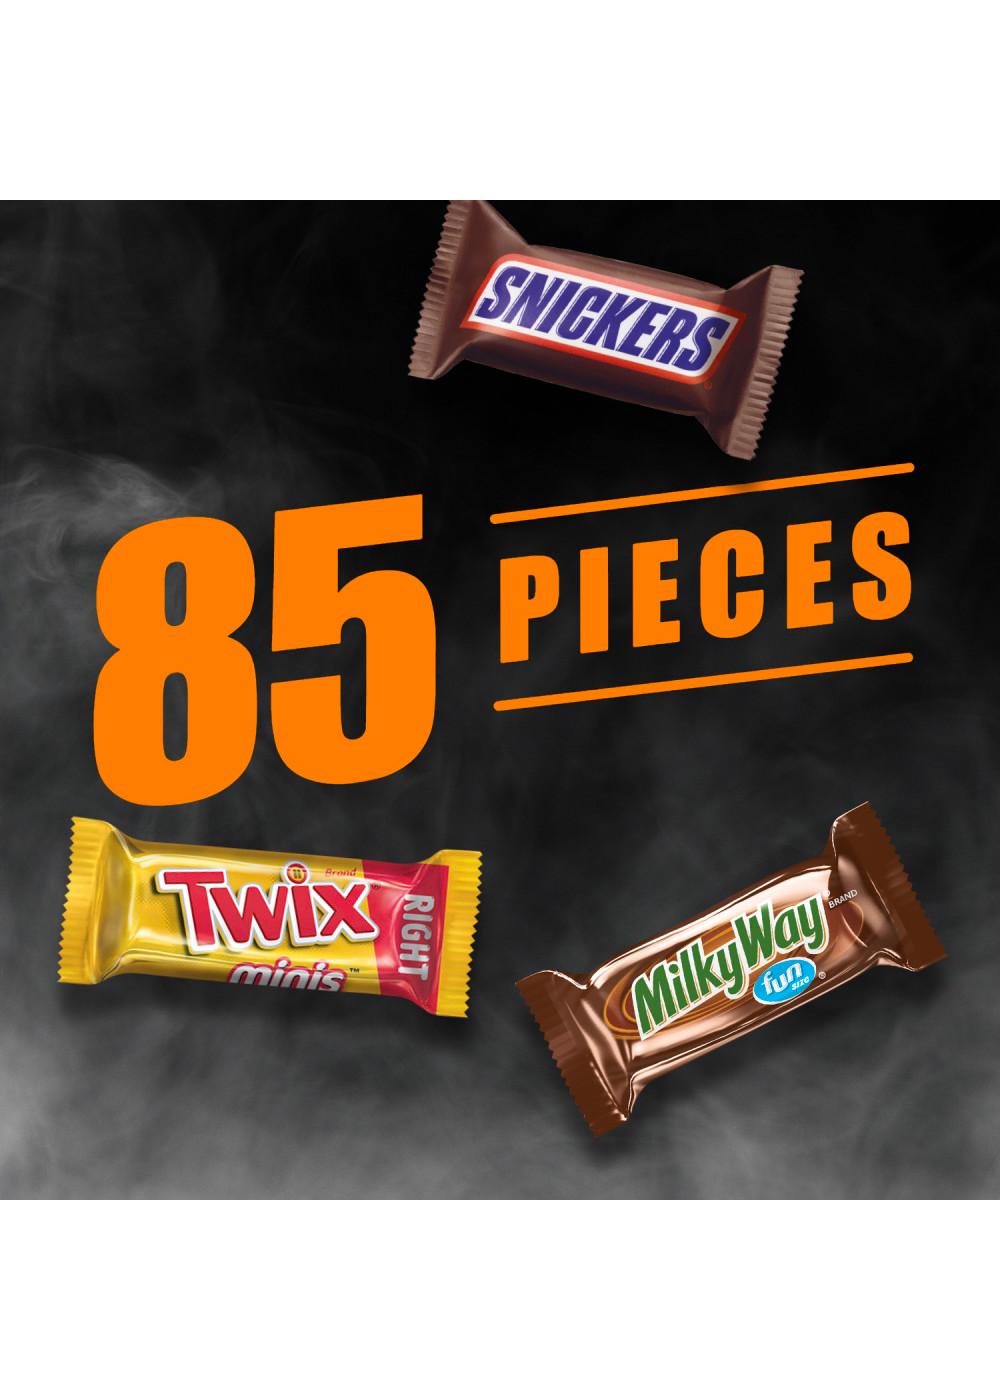 Snickers, Twix & Milky Way Assoted Fun Size Halloween Candy Bars; image 2 of 7